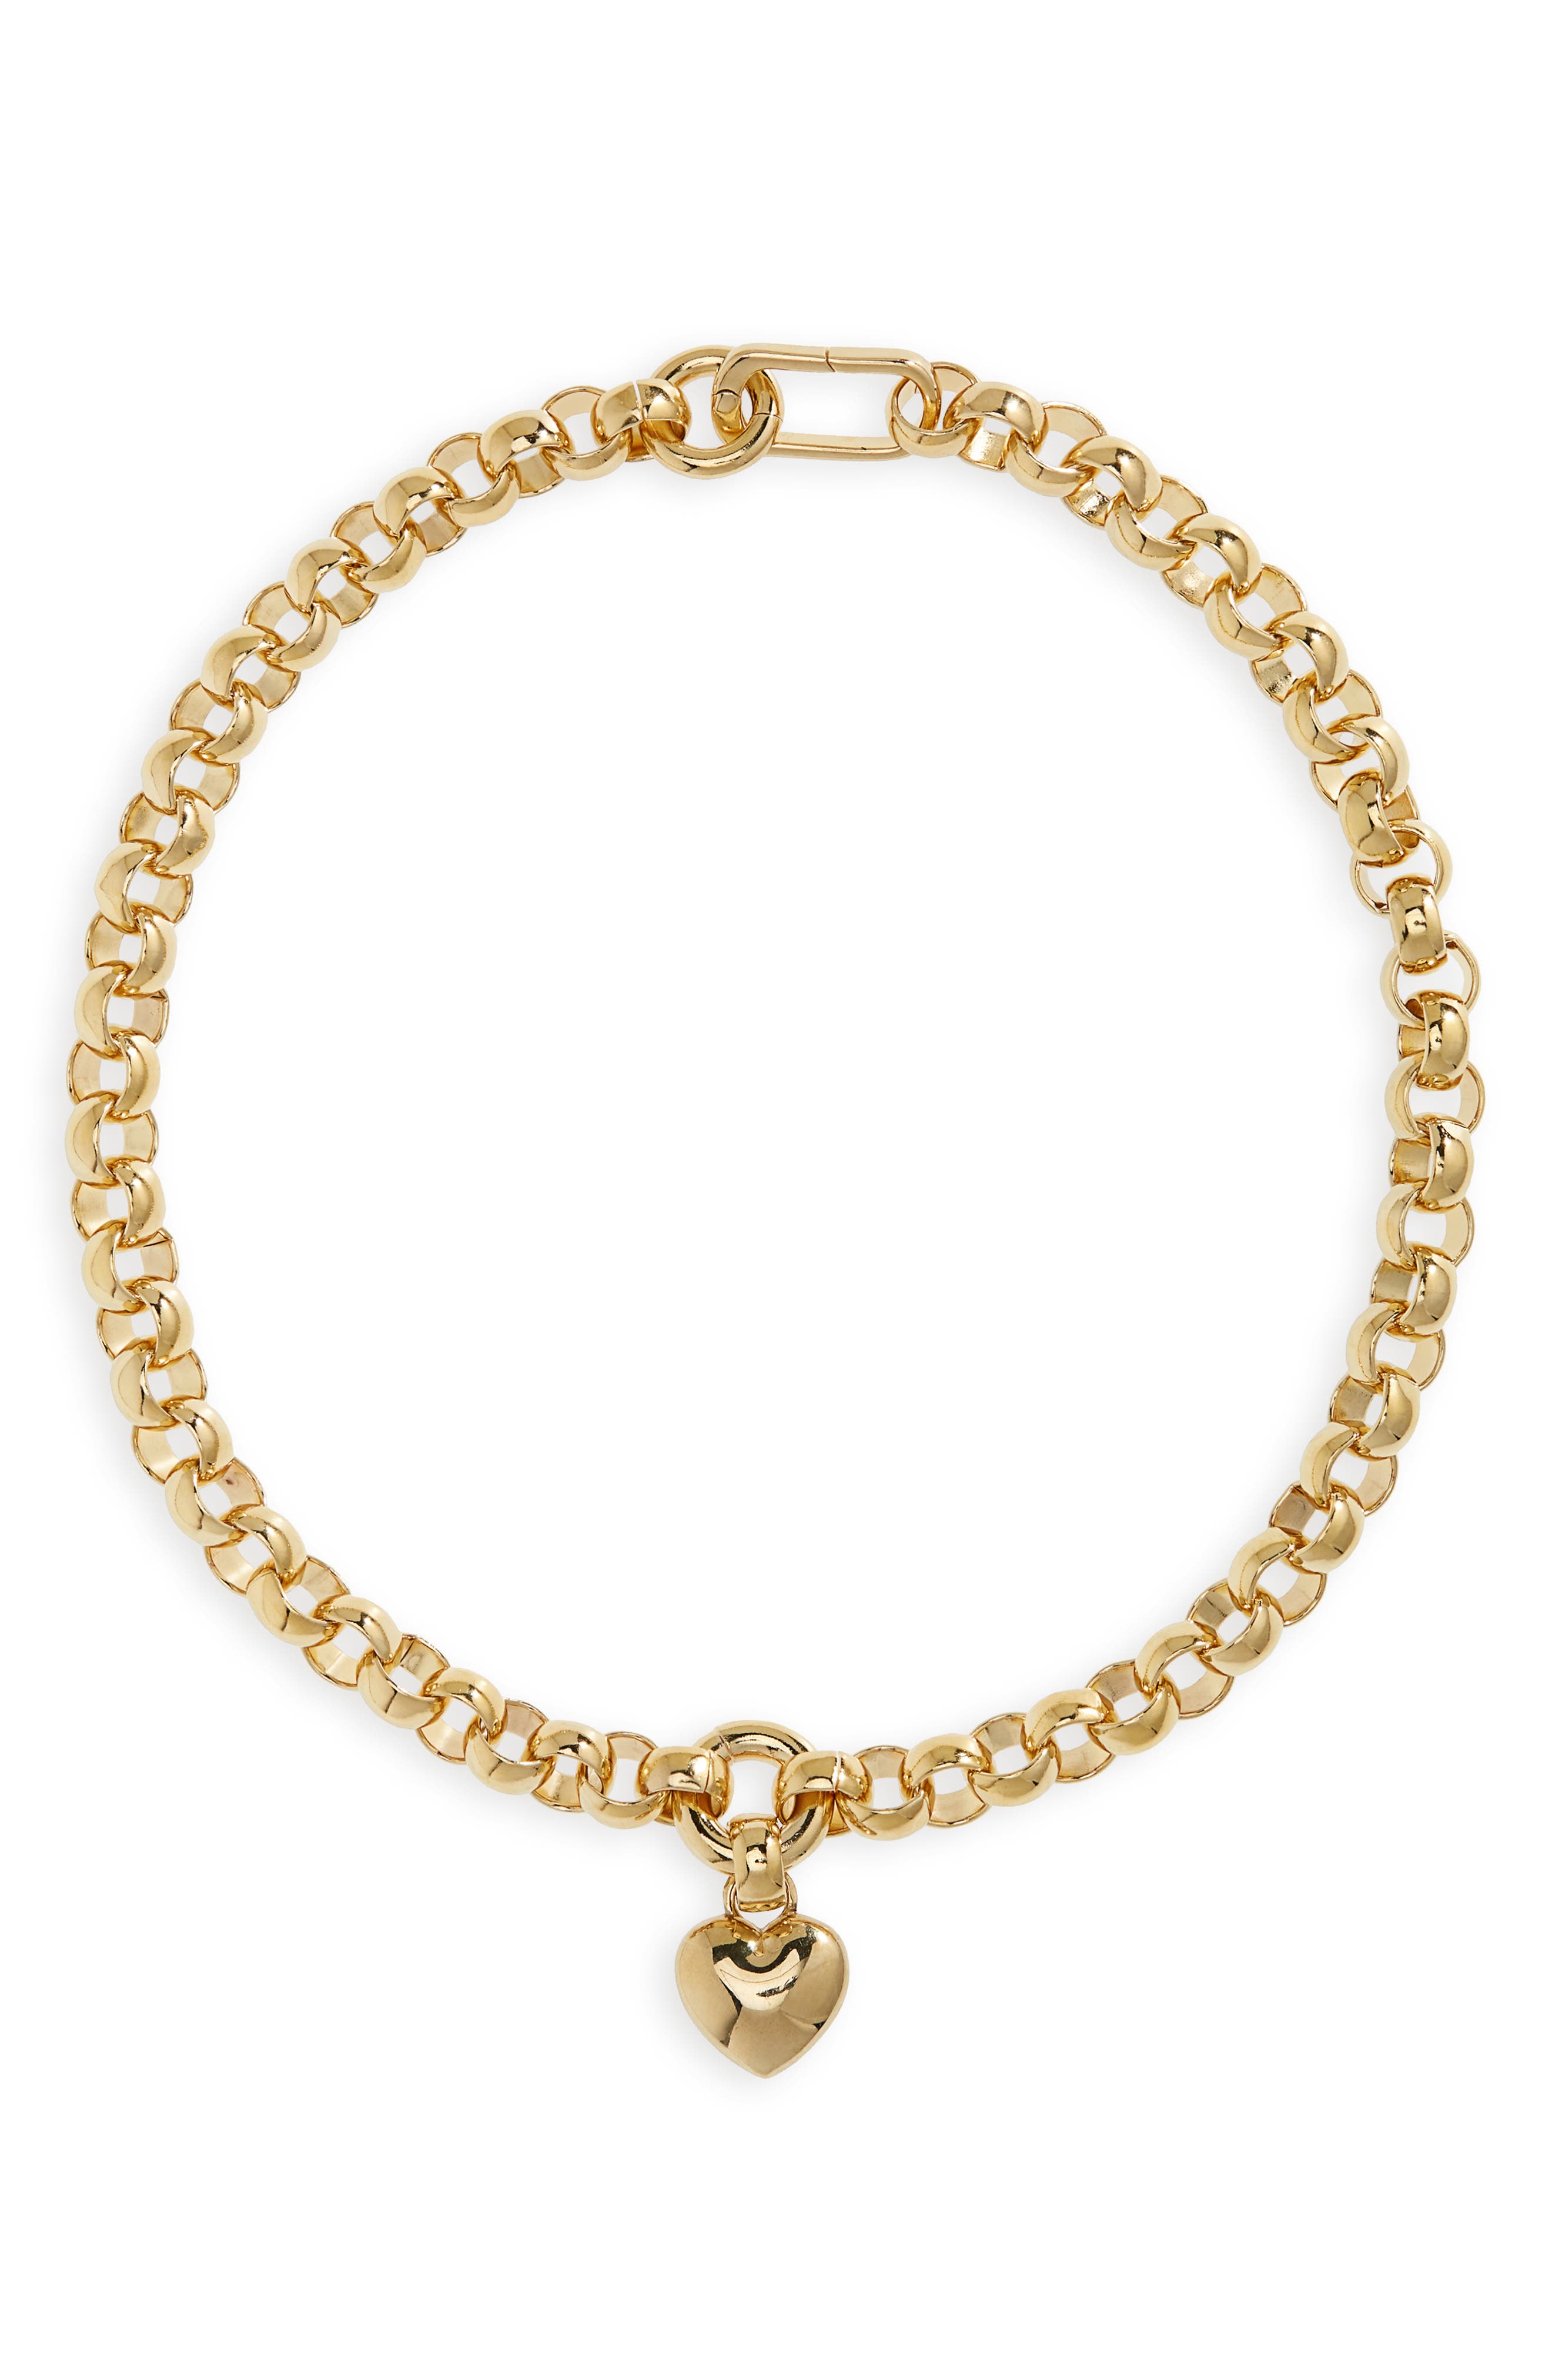 Laura Lombardi Amorina Heart Pendant Necklace in 14Kt Gold Plated at Nordstrom